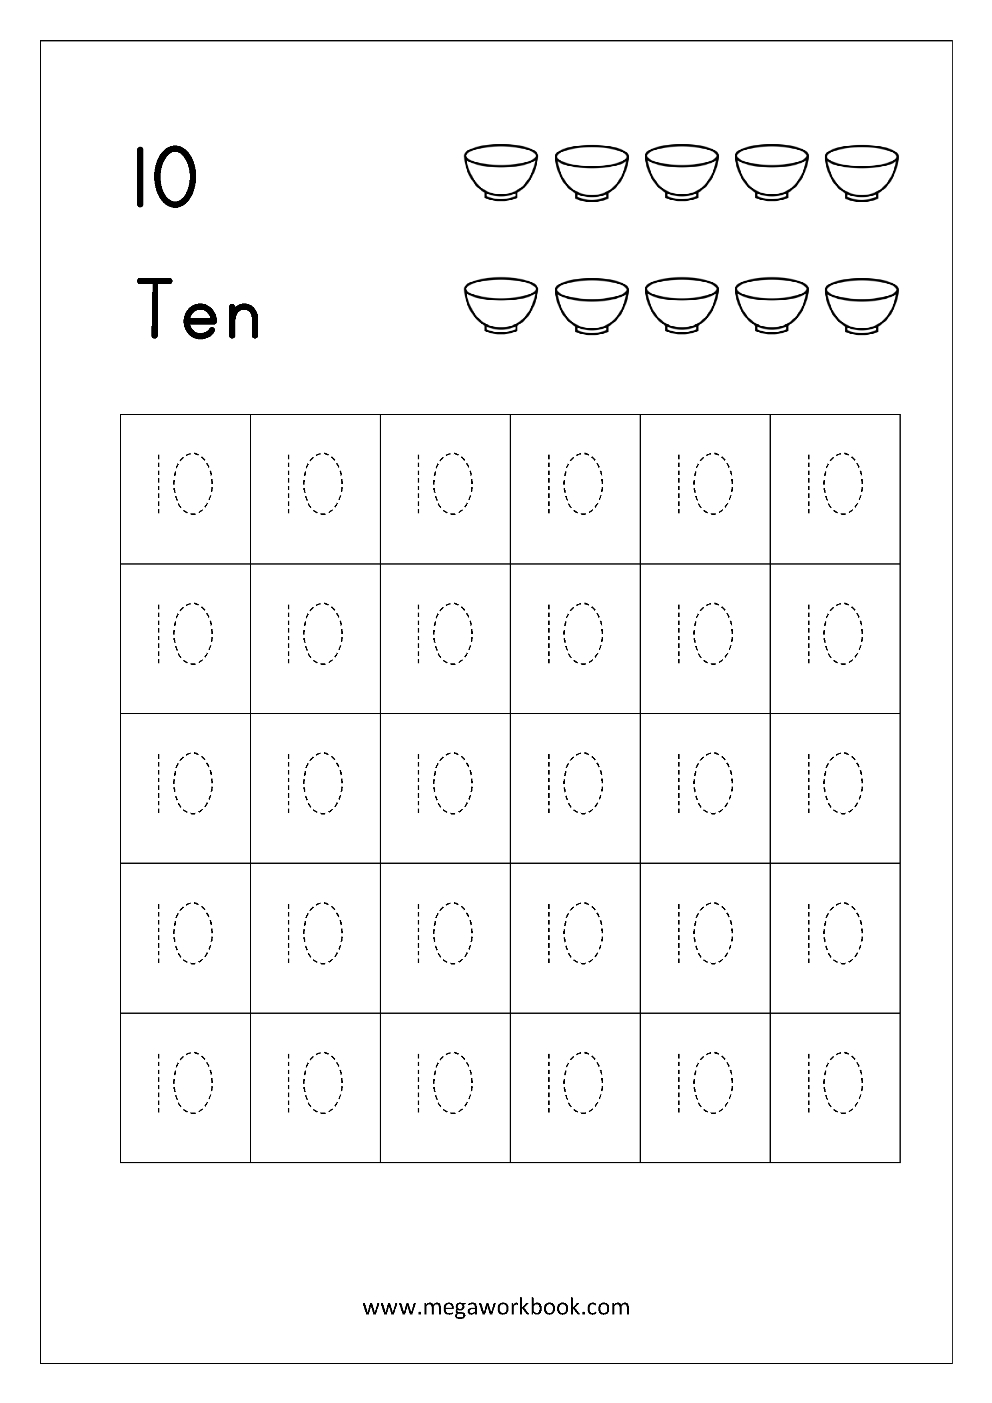 Free Printable Number Tracing And Writing (1-10) Worksheets - Number | Printable Number Tracing Worksheets For Kindergarten